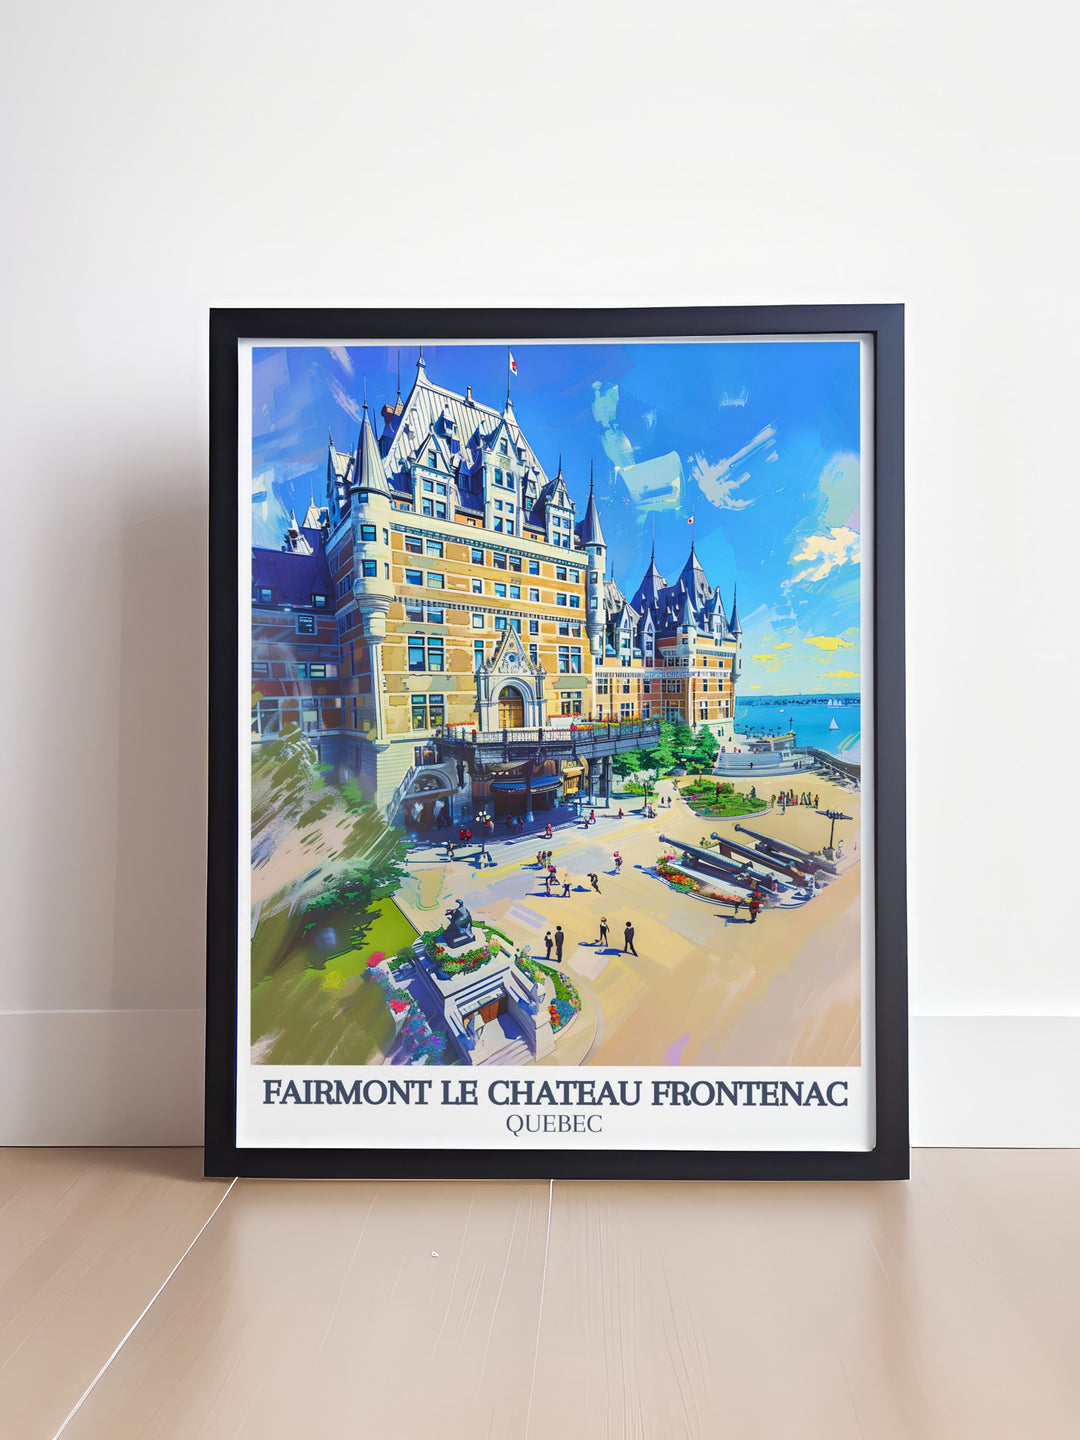 Vintage Le Chateau Frontenac poster featuring St. Lawrence River, The Chateau Frontenac Tower. A timeless piece of Canada decor that brings the charm and elegance of Quebec City into your living space with intricate details and vibrant hues.